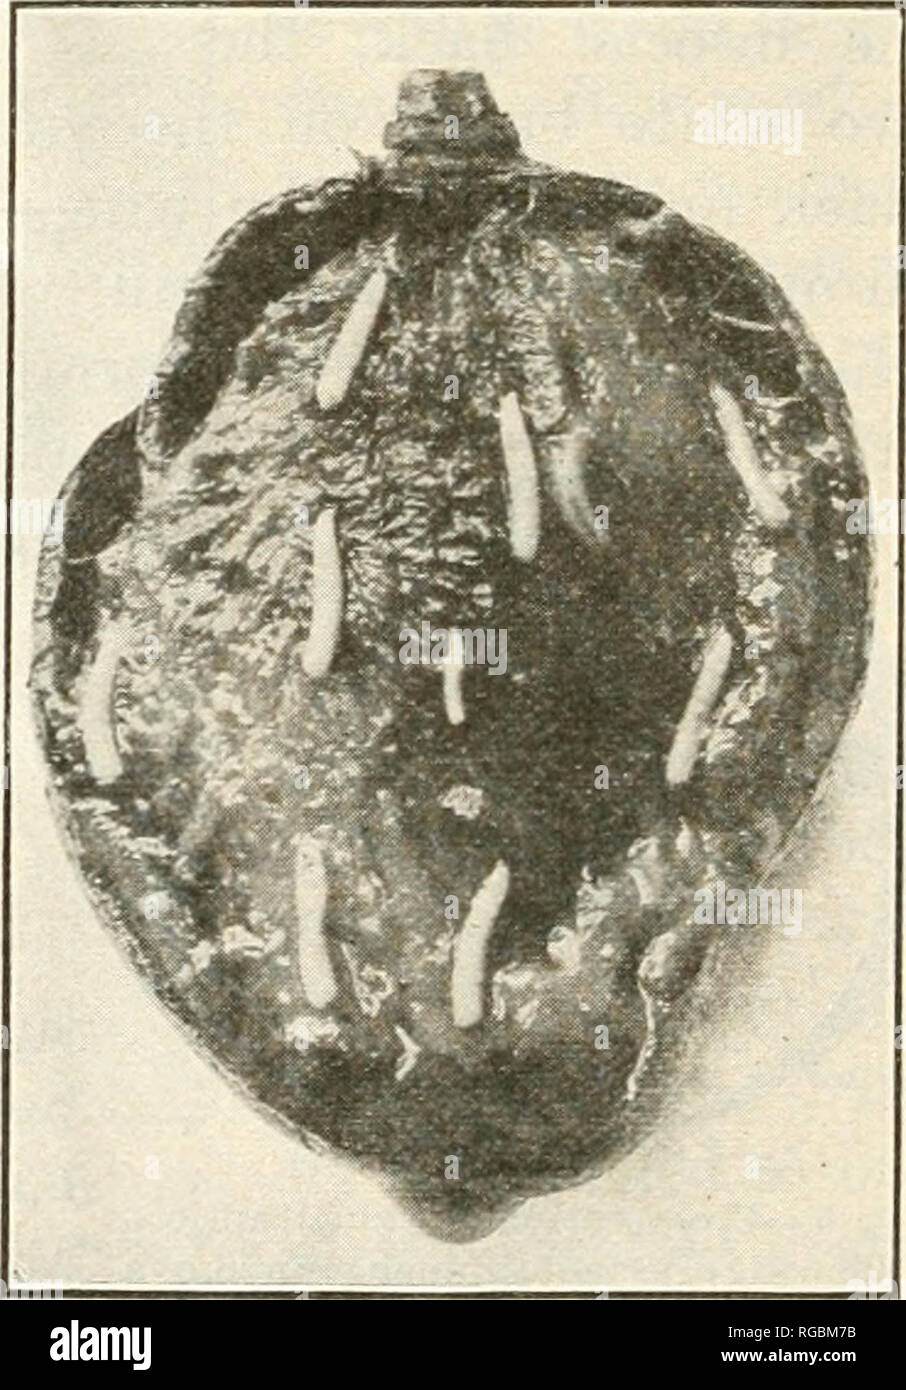 . Bulletin of the U.S. Department of Agriculture. Agriculture; Agriculture -- United States. Fig. 7.—Cross section of peach shoing general shriveling of walls of egg cavity and separation of eggs. Drawing made one and one-half days after eggs were laid. (Authors' illustration.) egg cavity as the result of repeated egg laying by many females through the same opening in the skin. The larvse.—The eggs hatch into whitish larv?e, or maggots, that burrow or tunnel in all directions through the pulp, feeding as they go and causing decays to start. When first hatched they are very difficult to detec Stock Photo